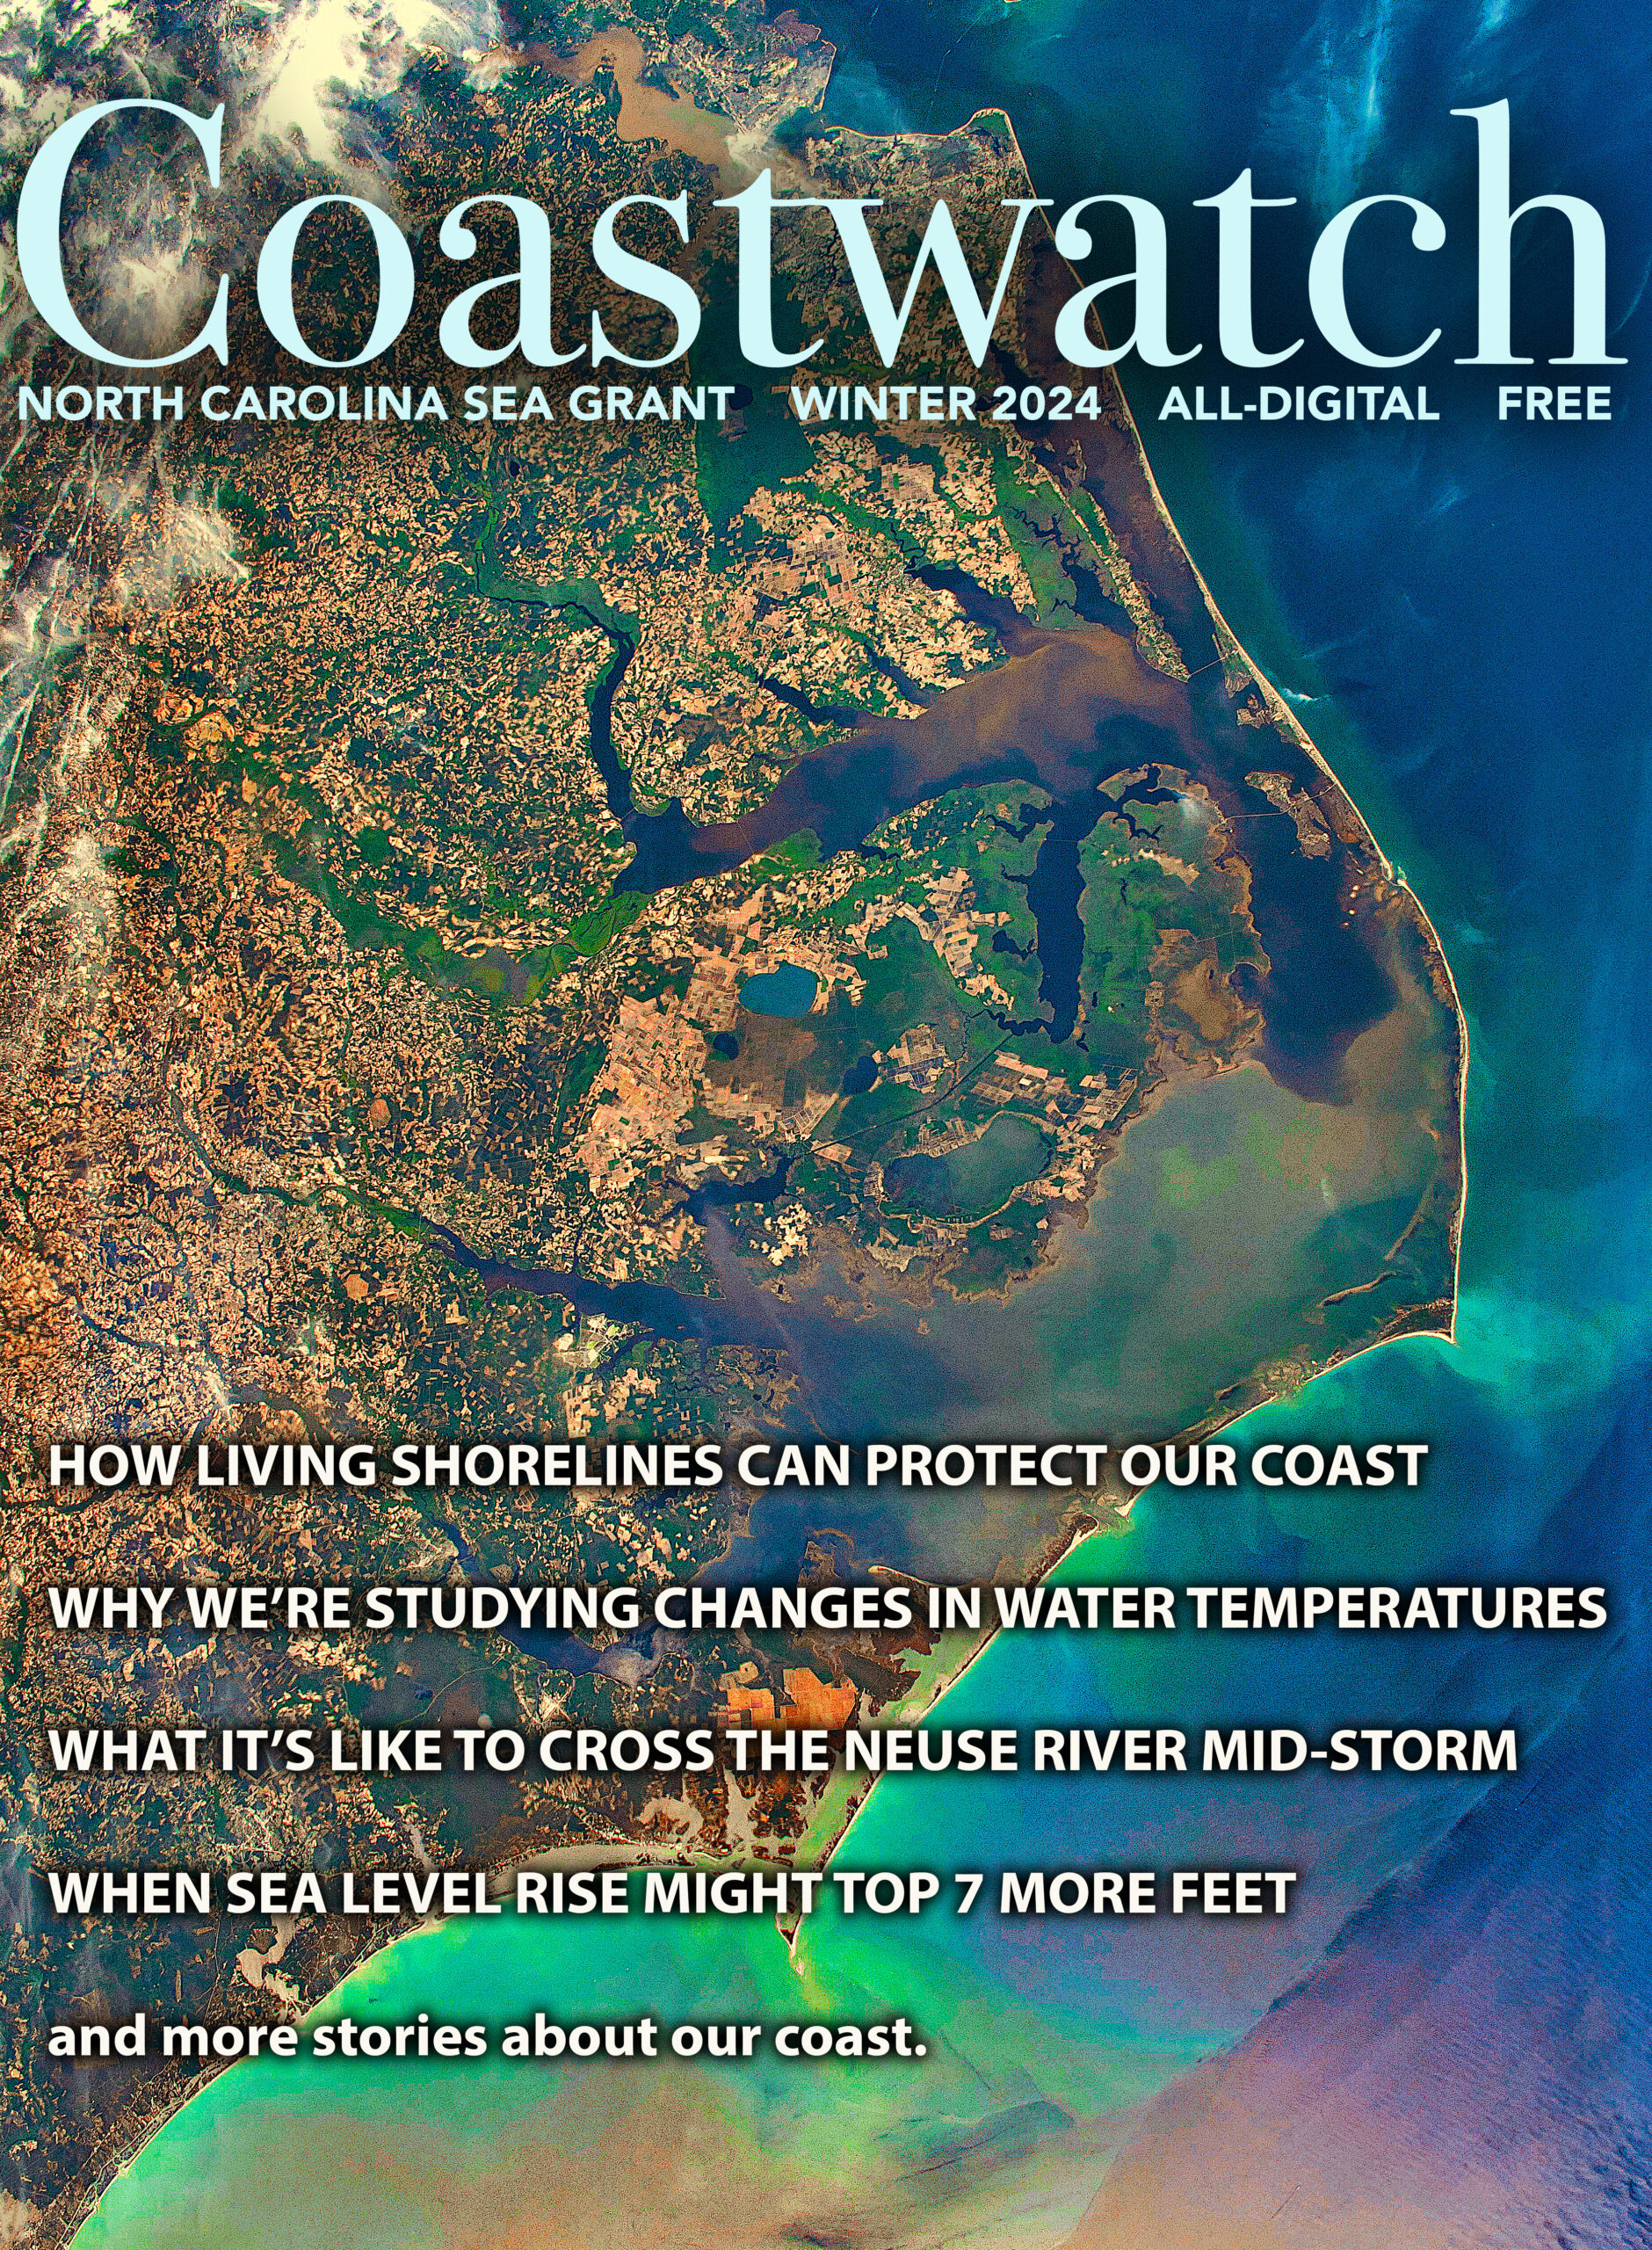 image: WINTER 2024 COVER of COASTWATCH.